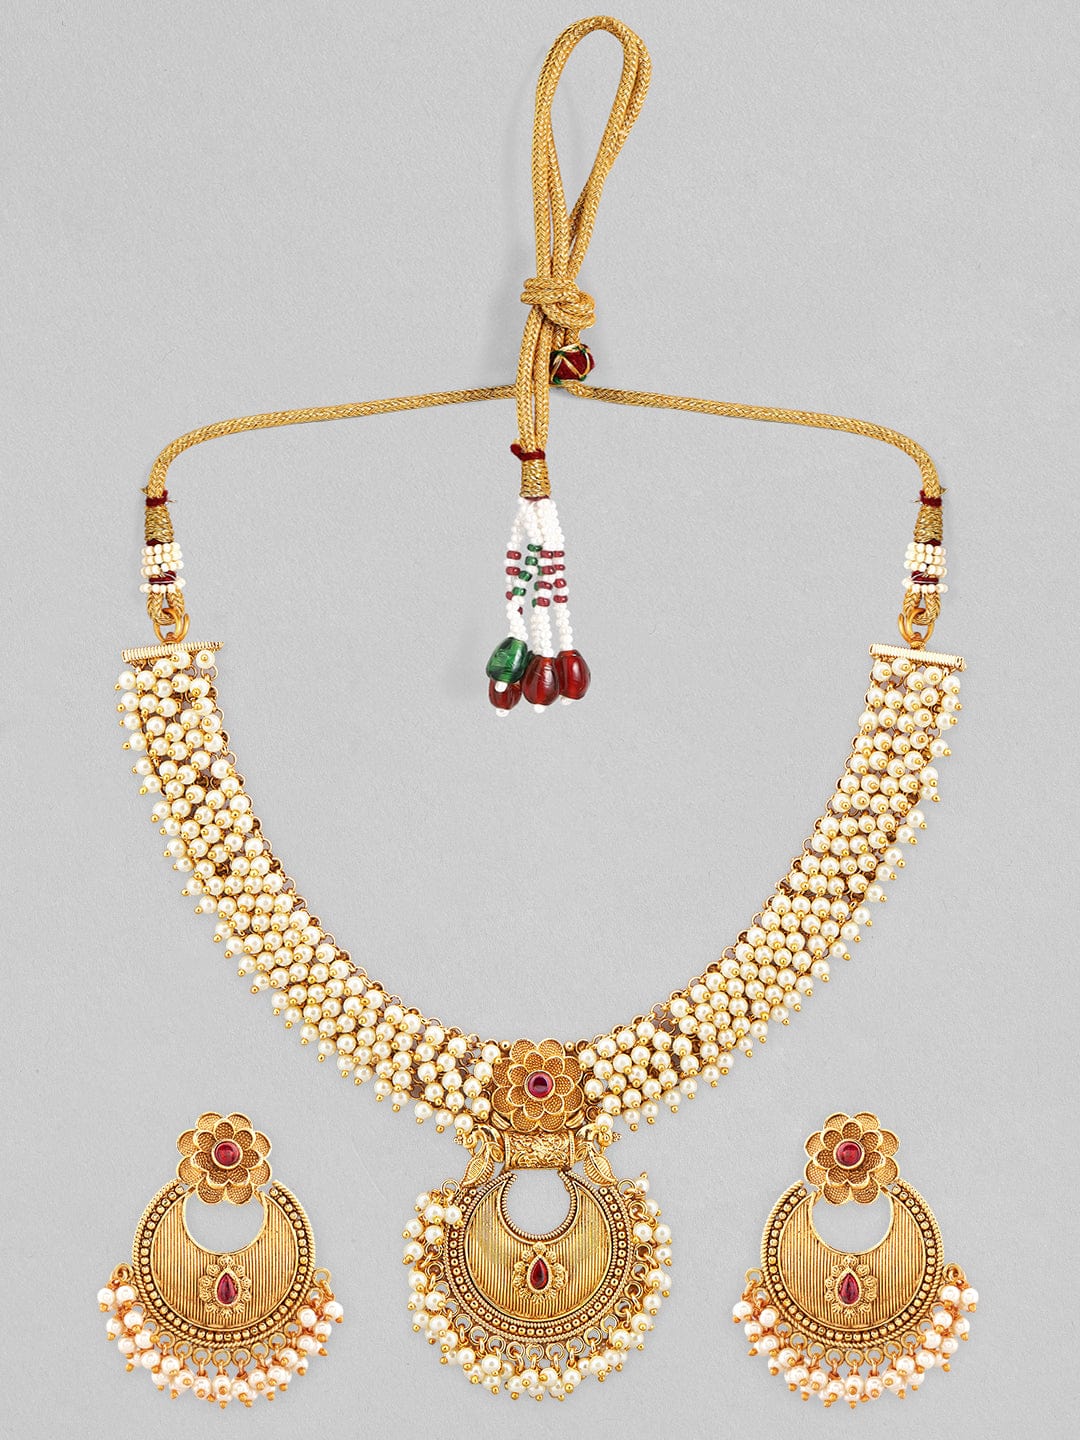 Rubans 20K Gold Plated Necklace Set With Floral Design, Pink Stone And Pearls. Necklace Set